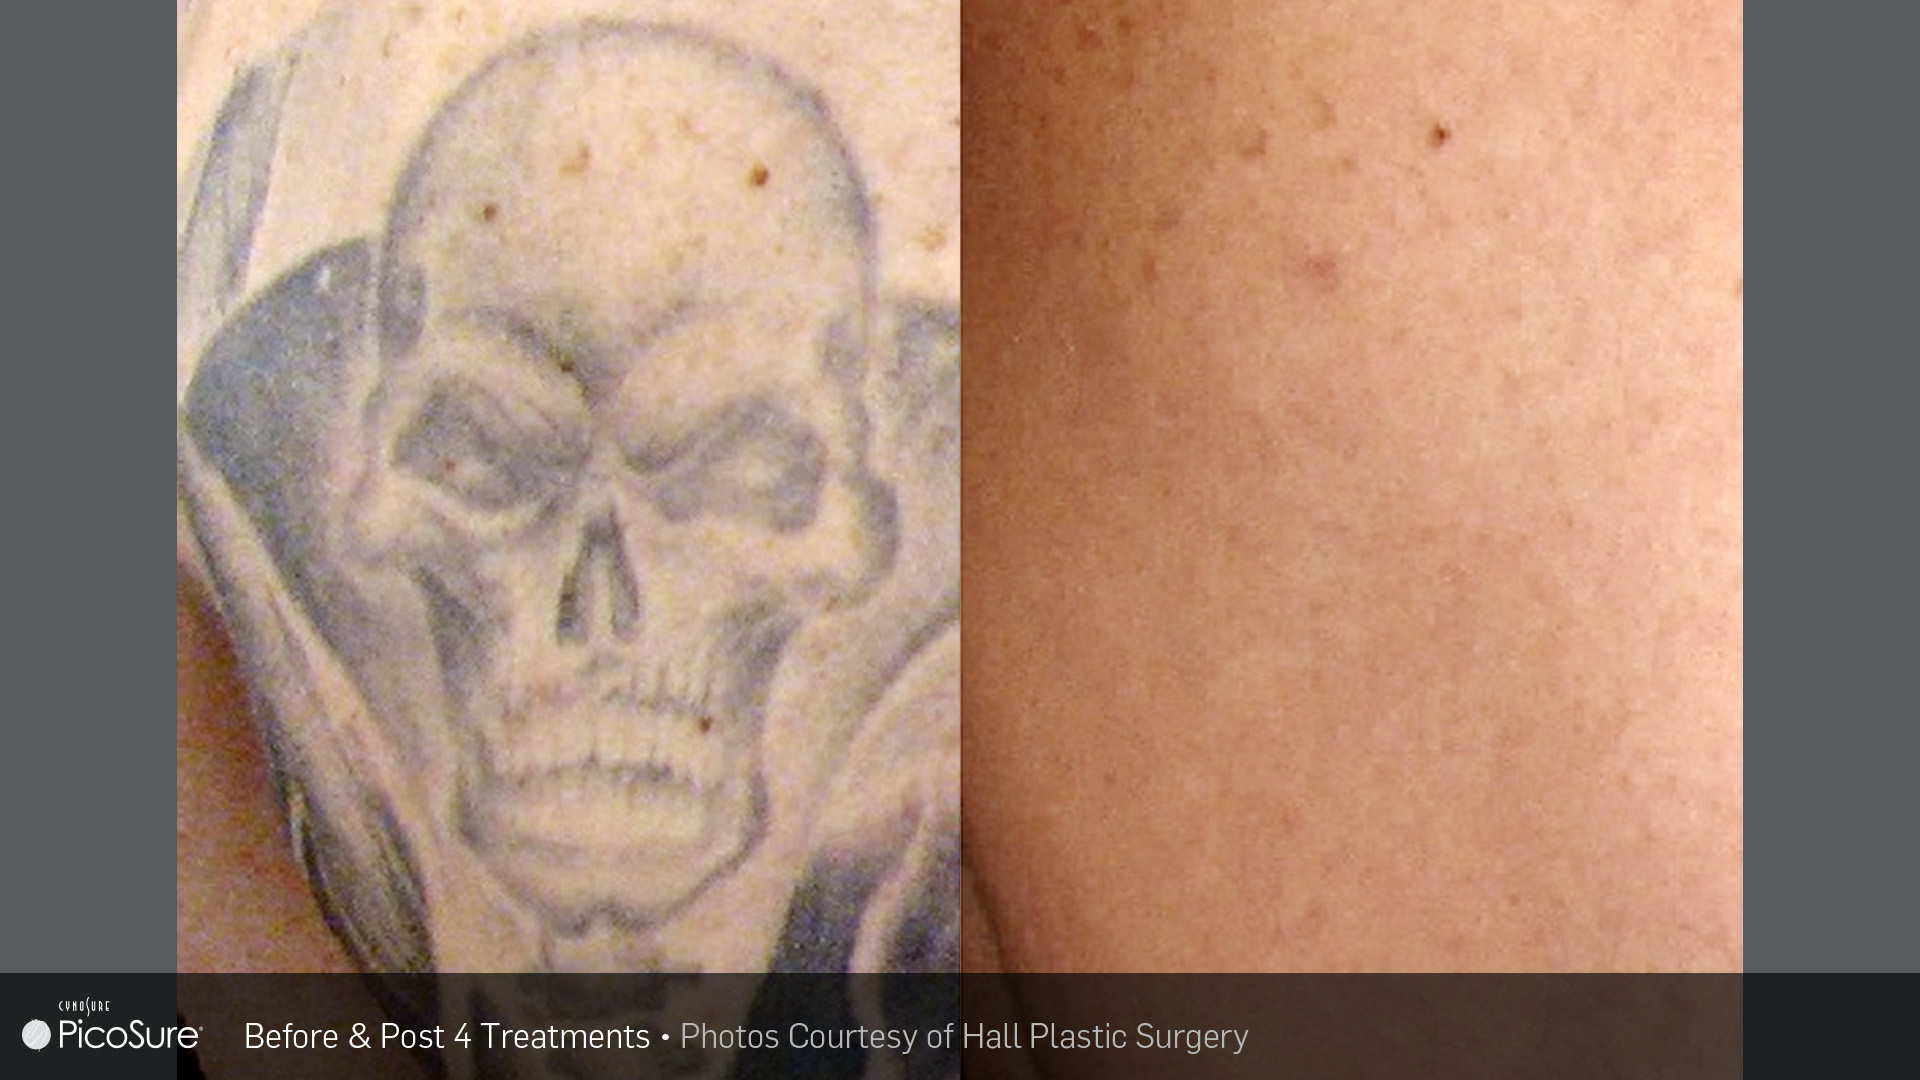 Tattoo Removal - Before and After Images